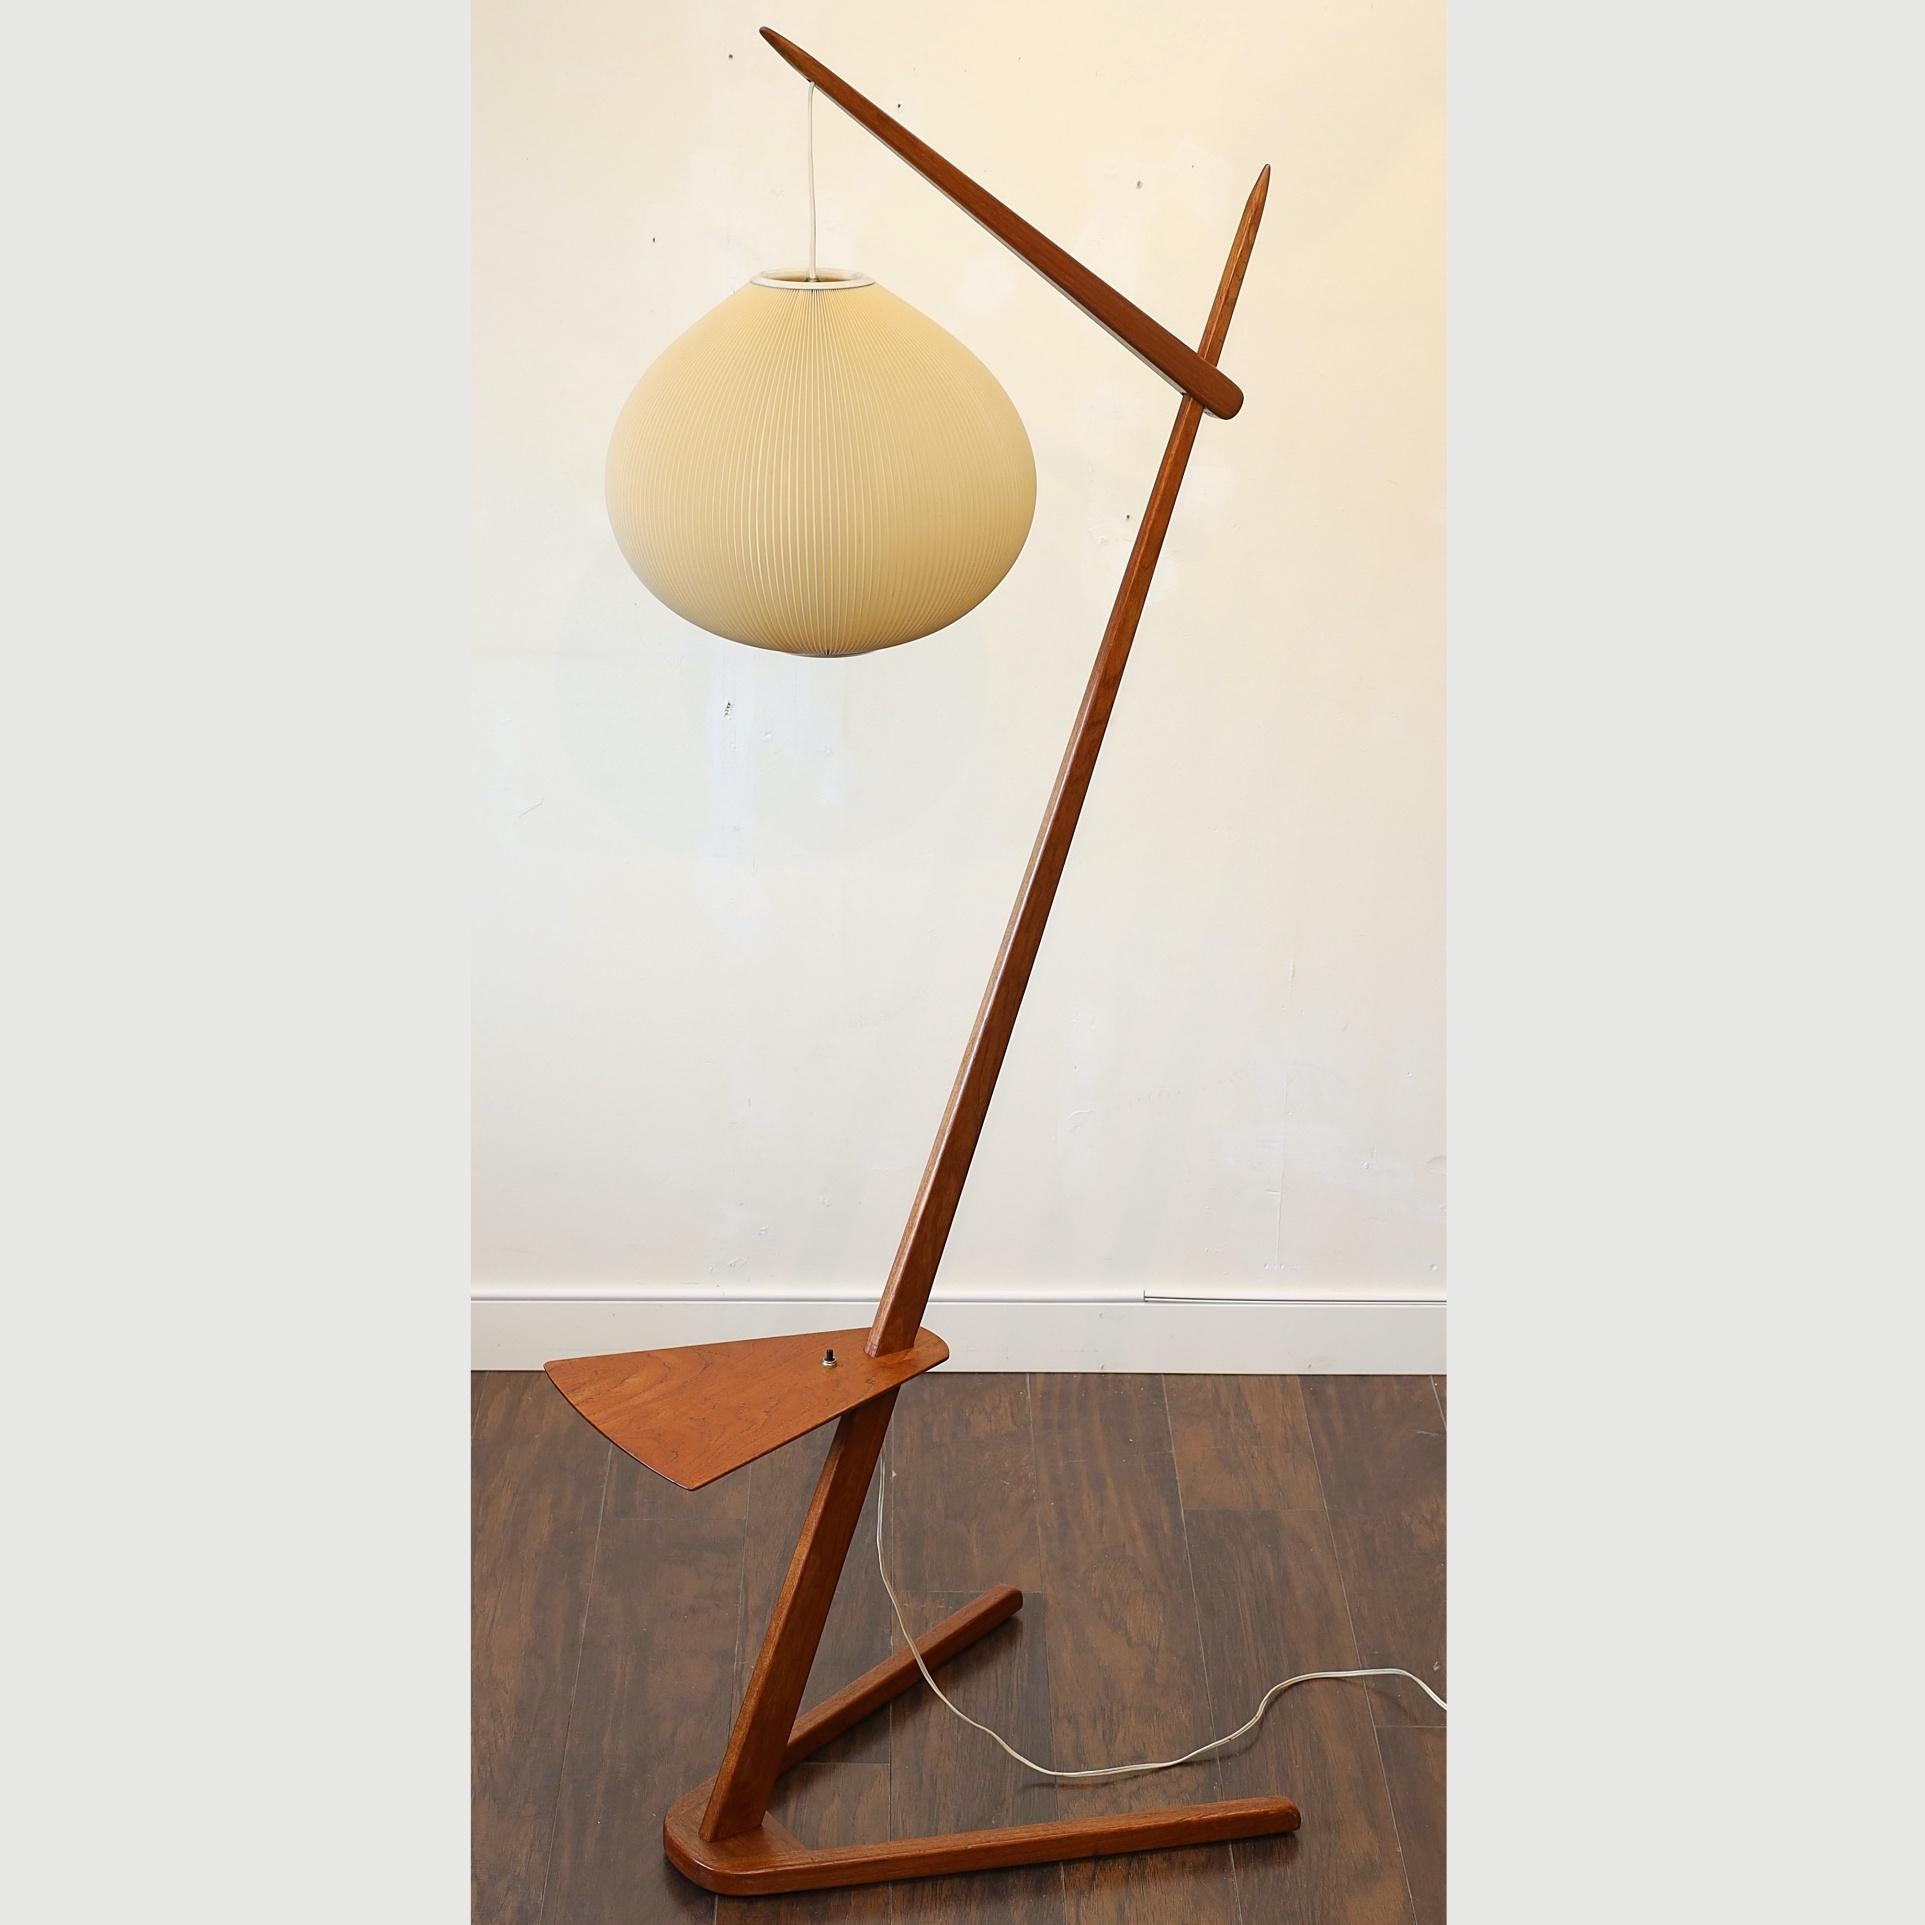 This is a amazing rare floor lamp that gives a large accent to any space with its unique and has a very attractive spherical lamp shade and teak neck structure.

Frame is in Solid Teak and the way the designer put the electric wire is curious enough